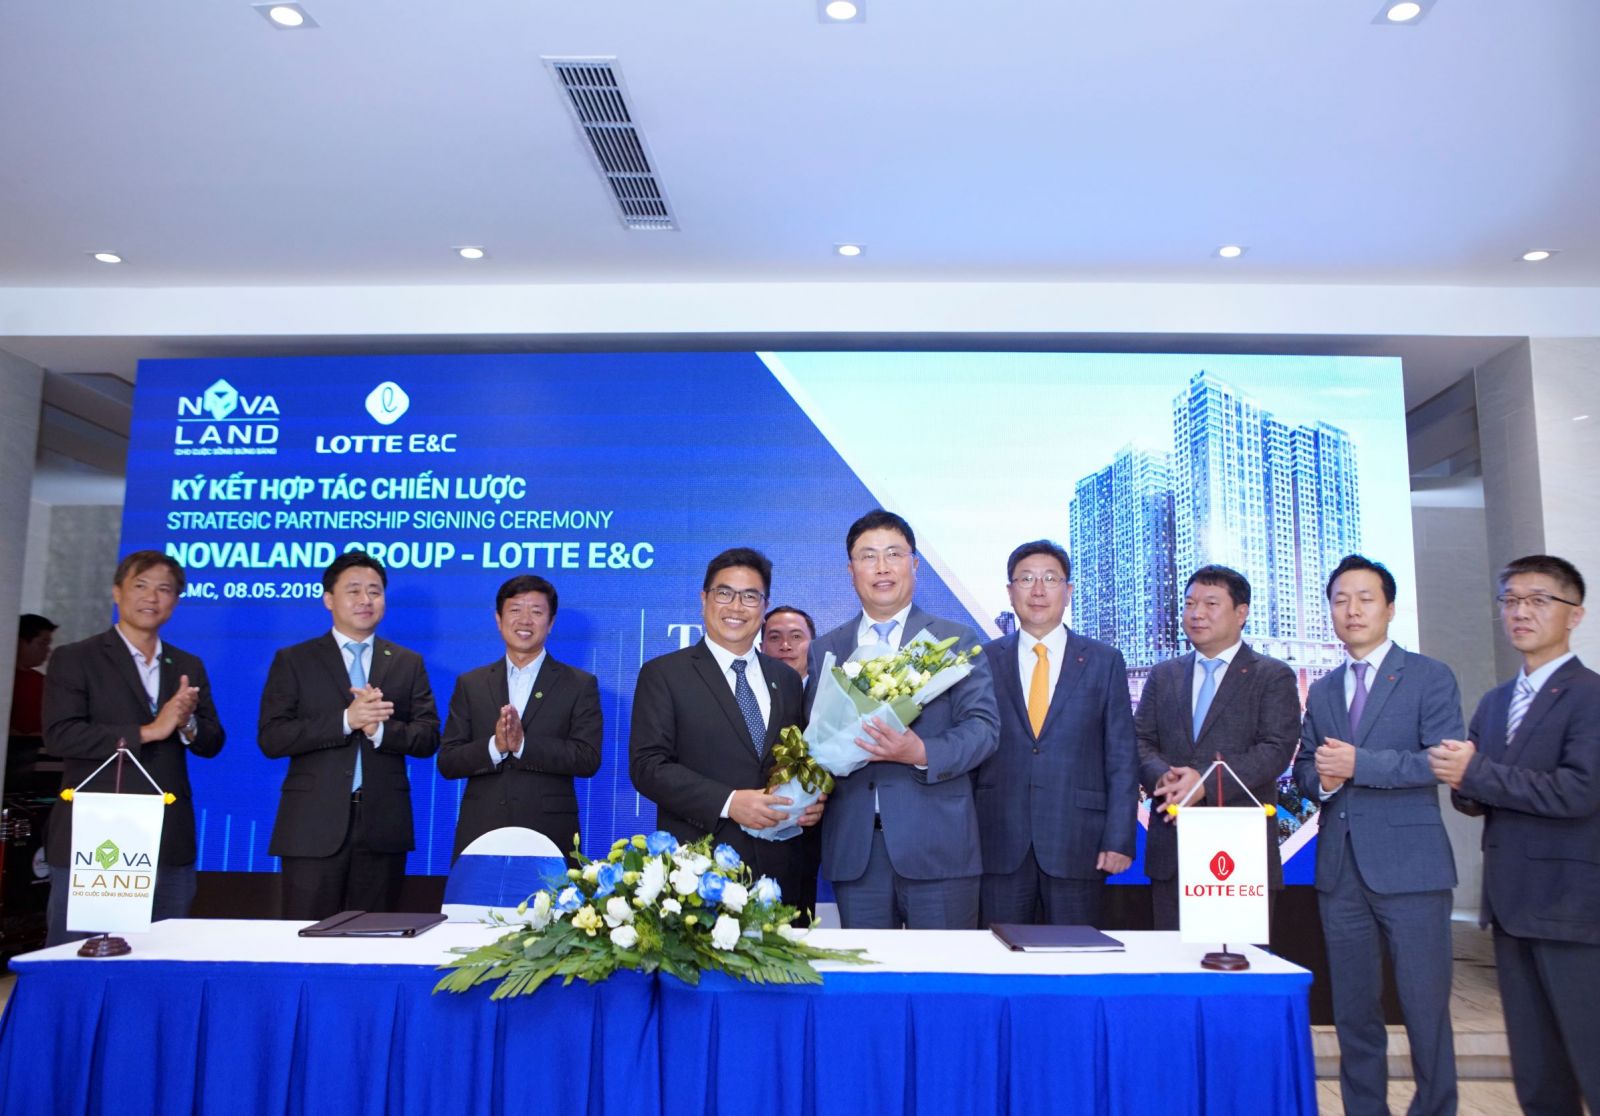 The strategic partnership signing ceremony between Novaland and Lotte E&C.